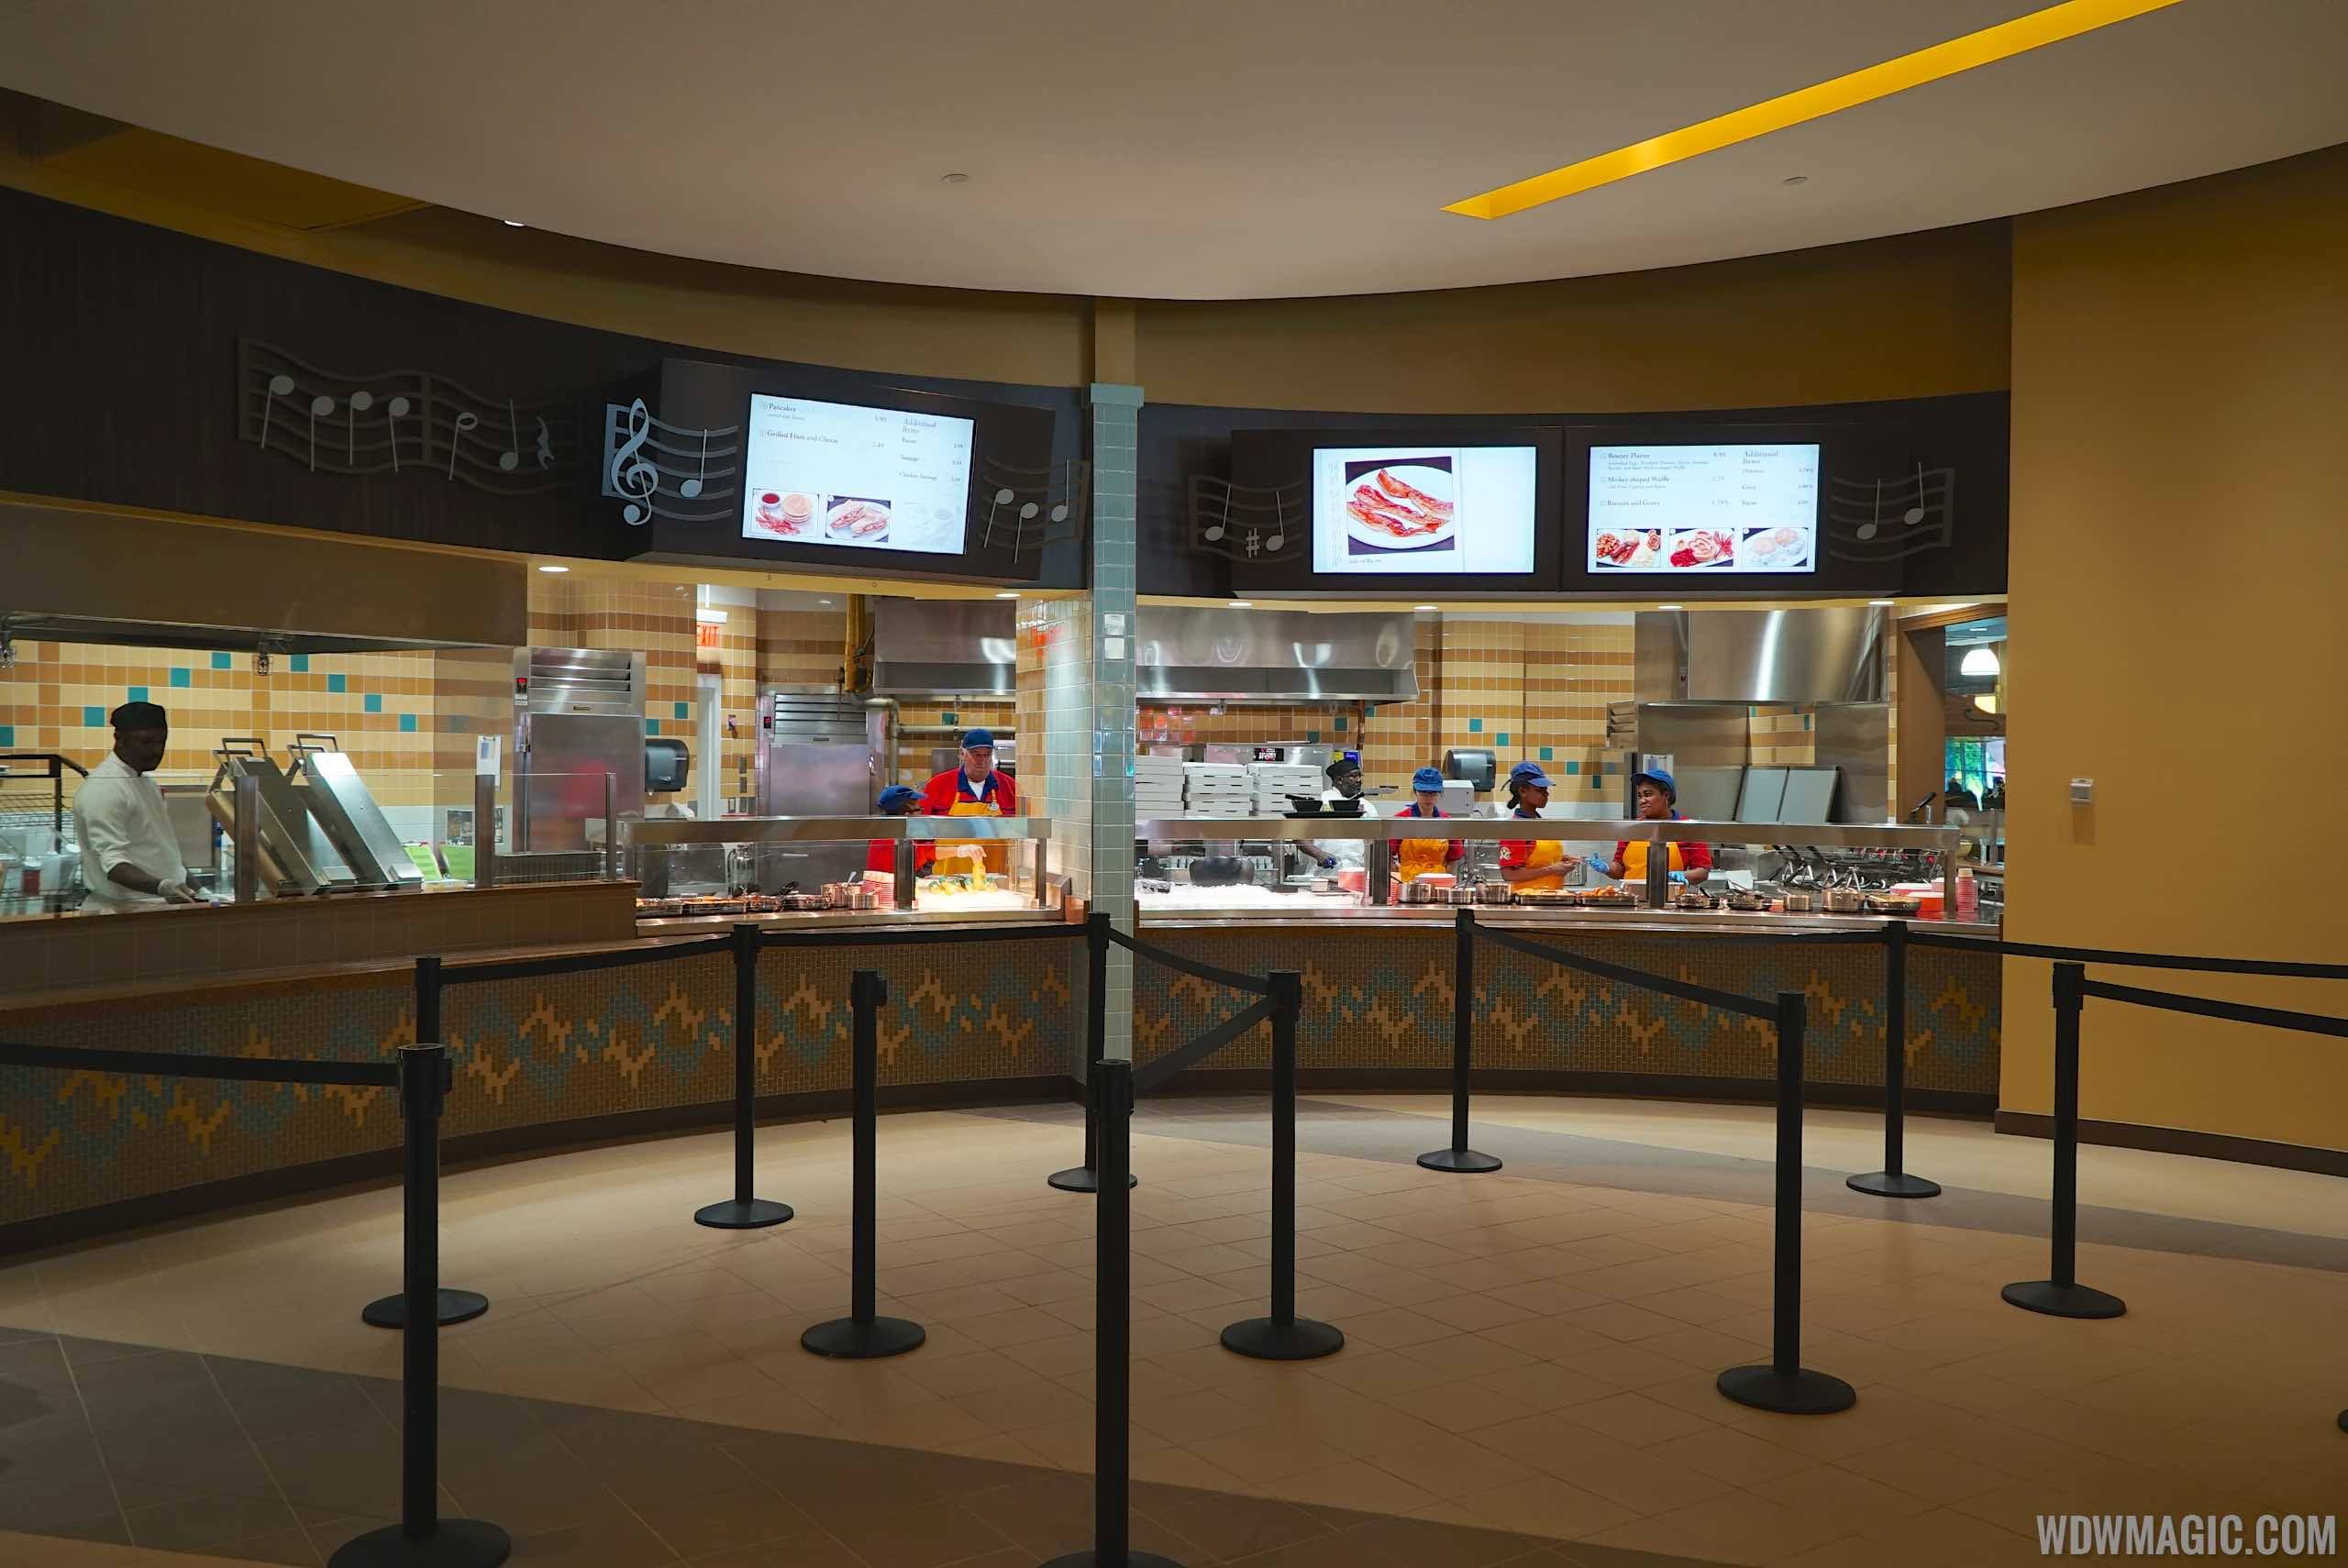 PHOTOS - Intermission Food Court at Disney's All Star Music reopens after major remodel